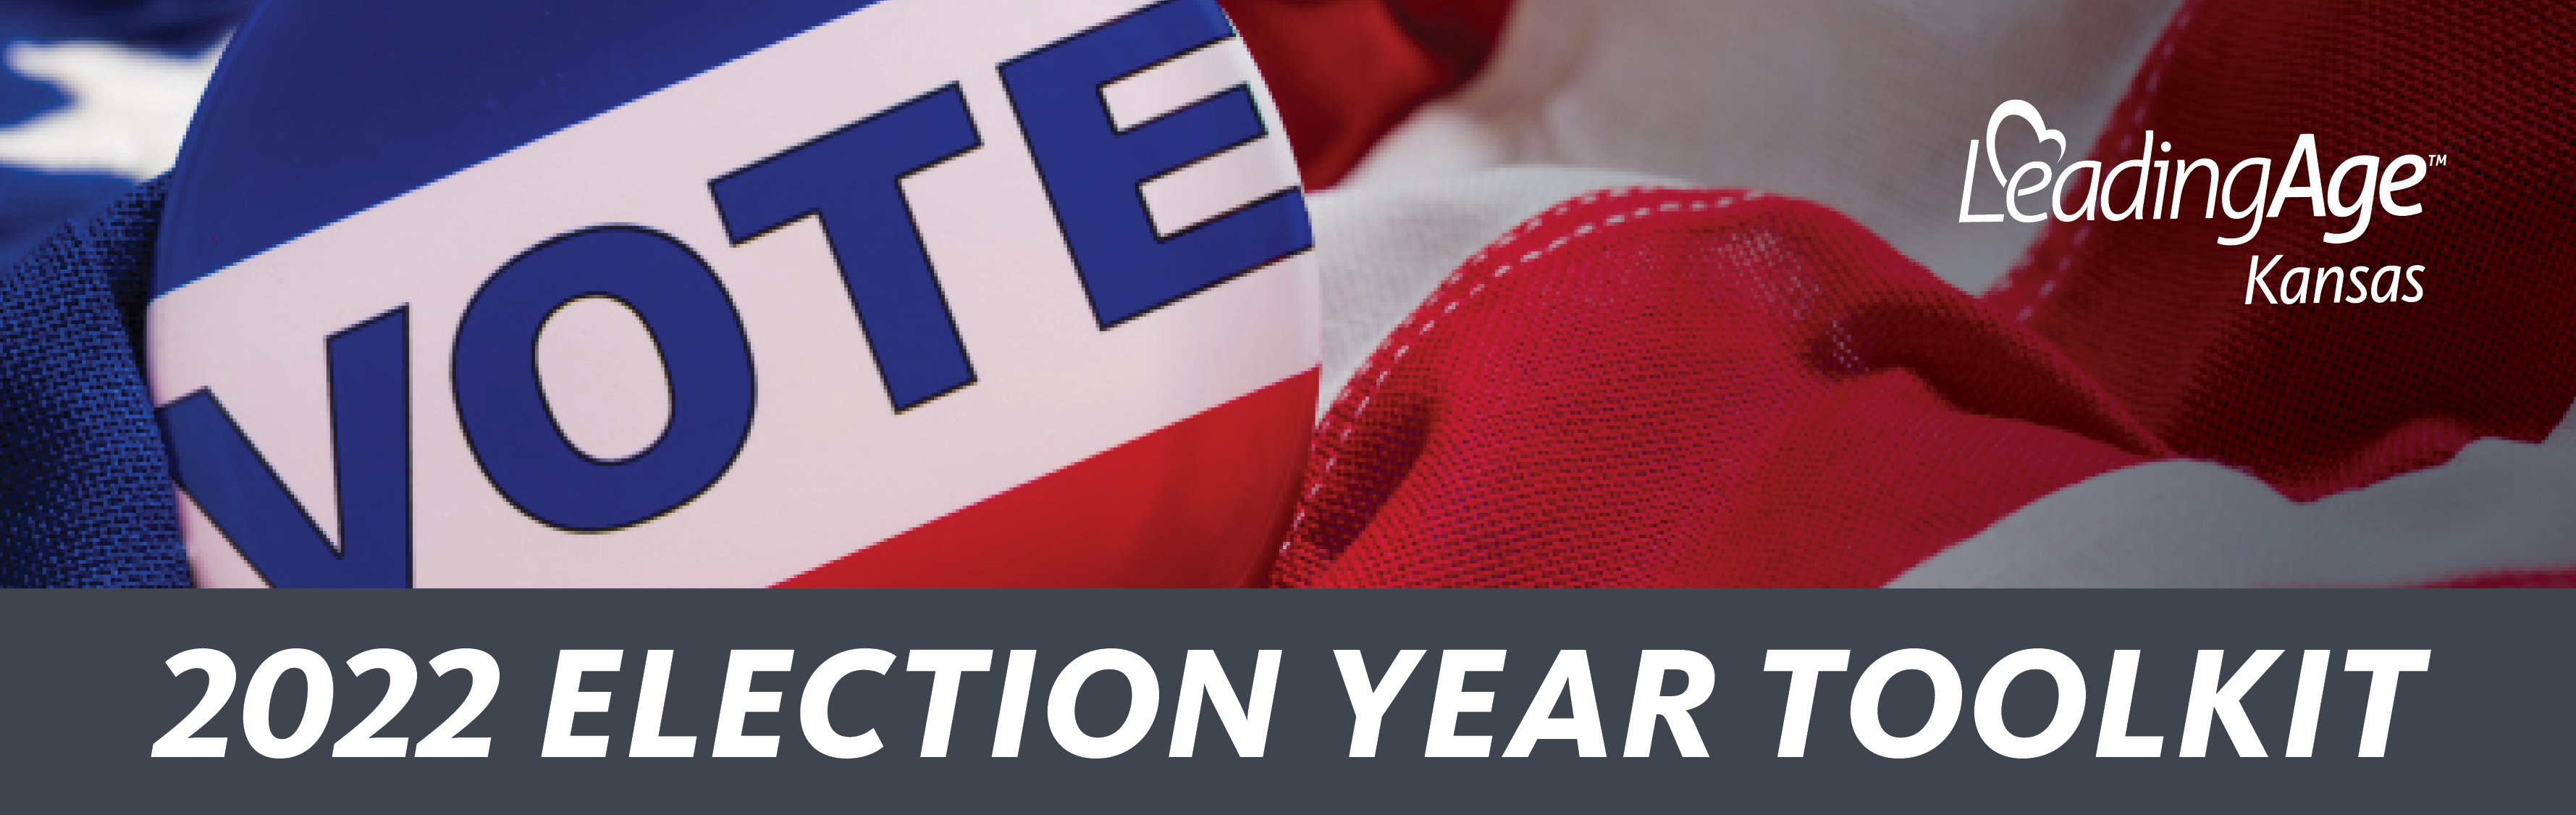 Election Year Toolkit Web Banner